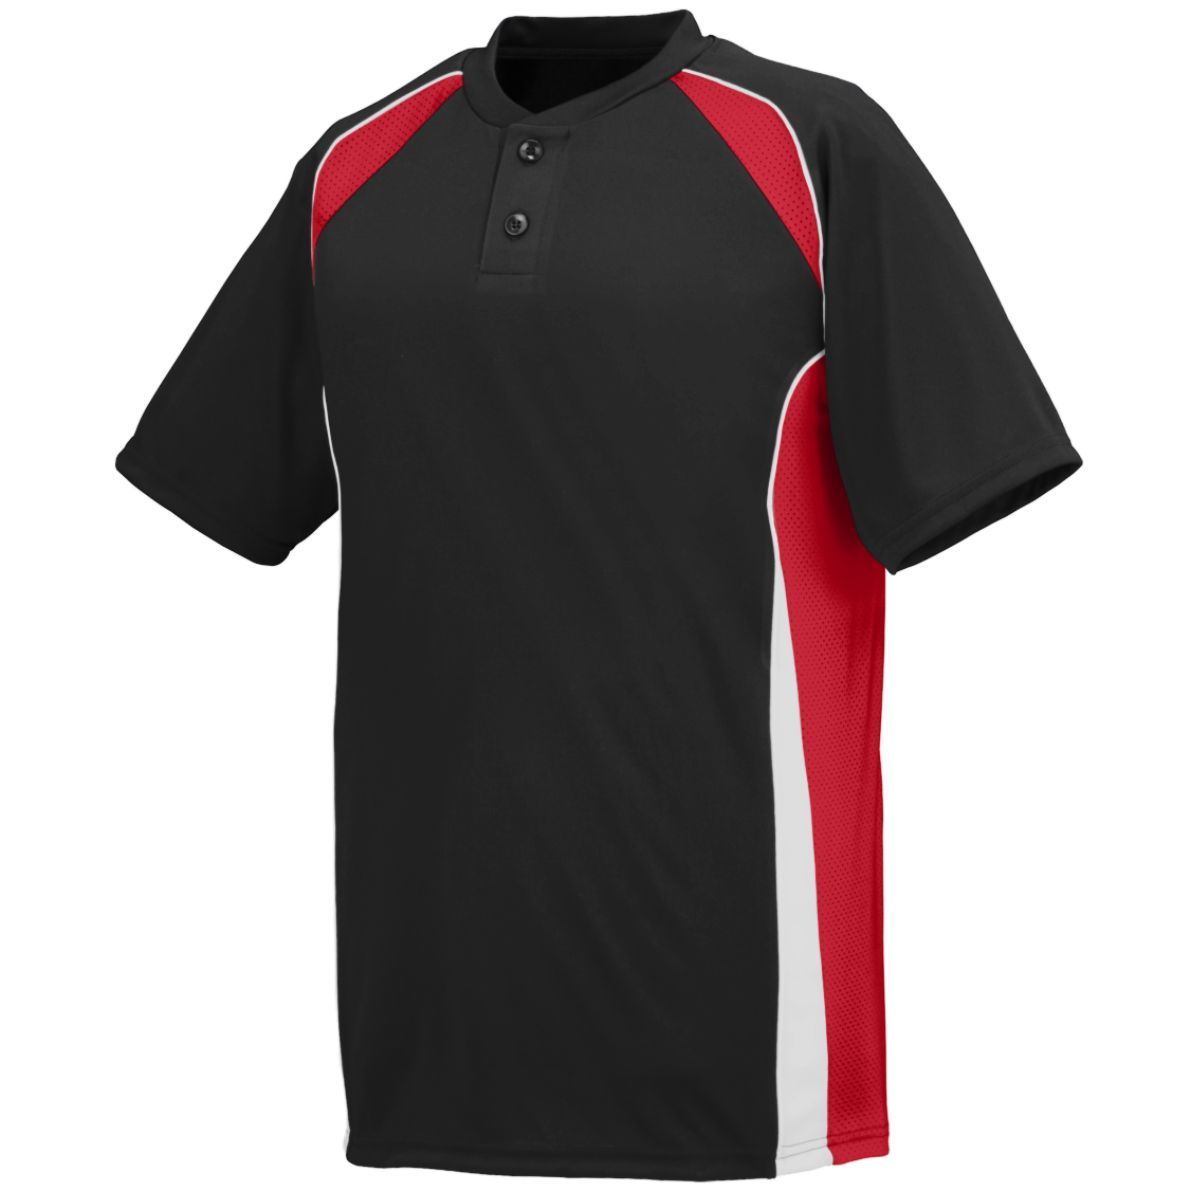 Augusta Sportswear Base Hit Jersey in Black/Red/White  -Part of the Adult, Adult-Jersey, Augusta-Products, Baseball, Shirts, All-Sports, All-Sports-1 product lines at KanaleyCreations.com